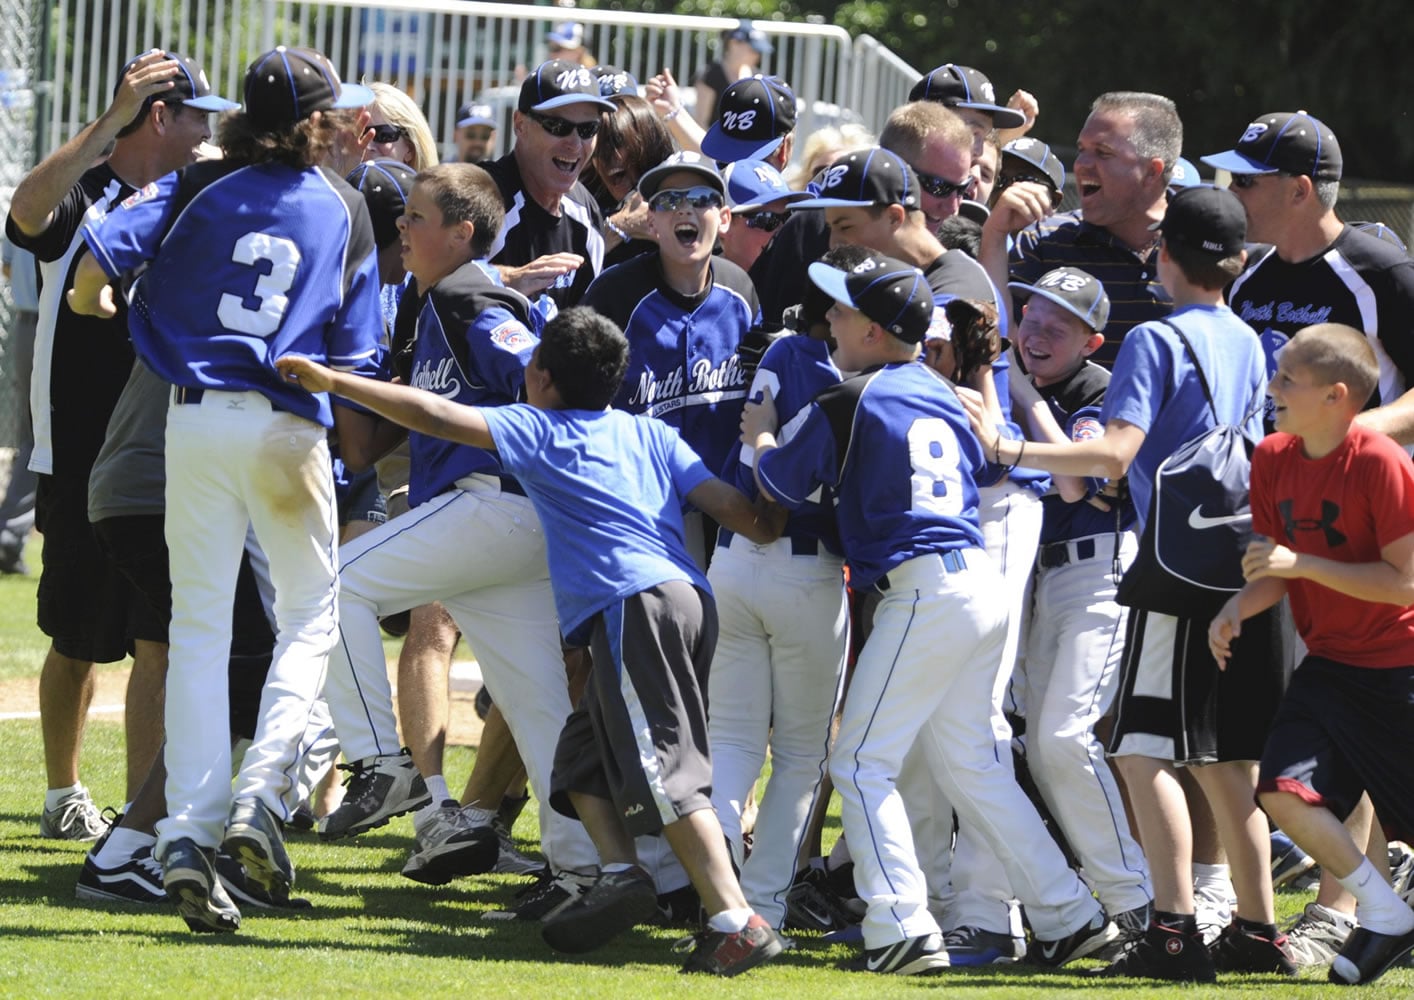 The North Bothell Little League team is surrounded by supporters as they celebrate their 5-3 victory in the championship game against Kent at the Fort Vancouver Little League field on Saturday.